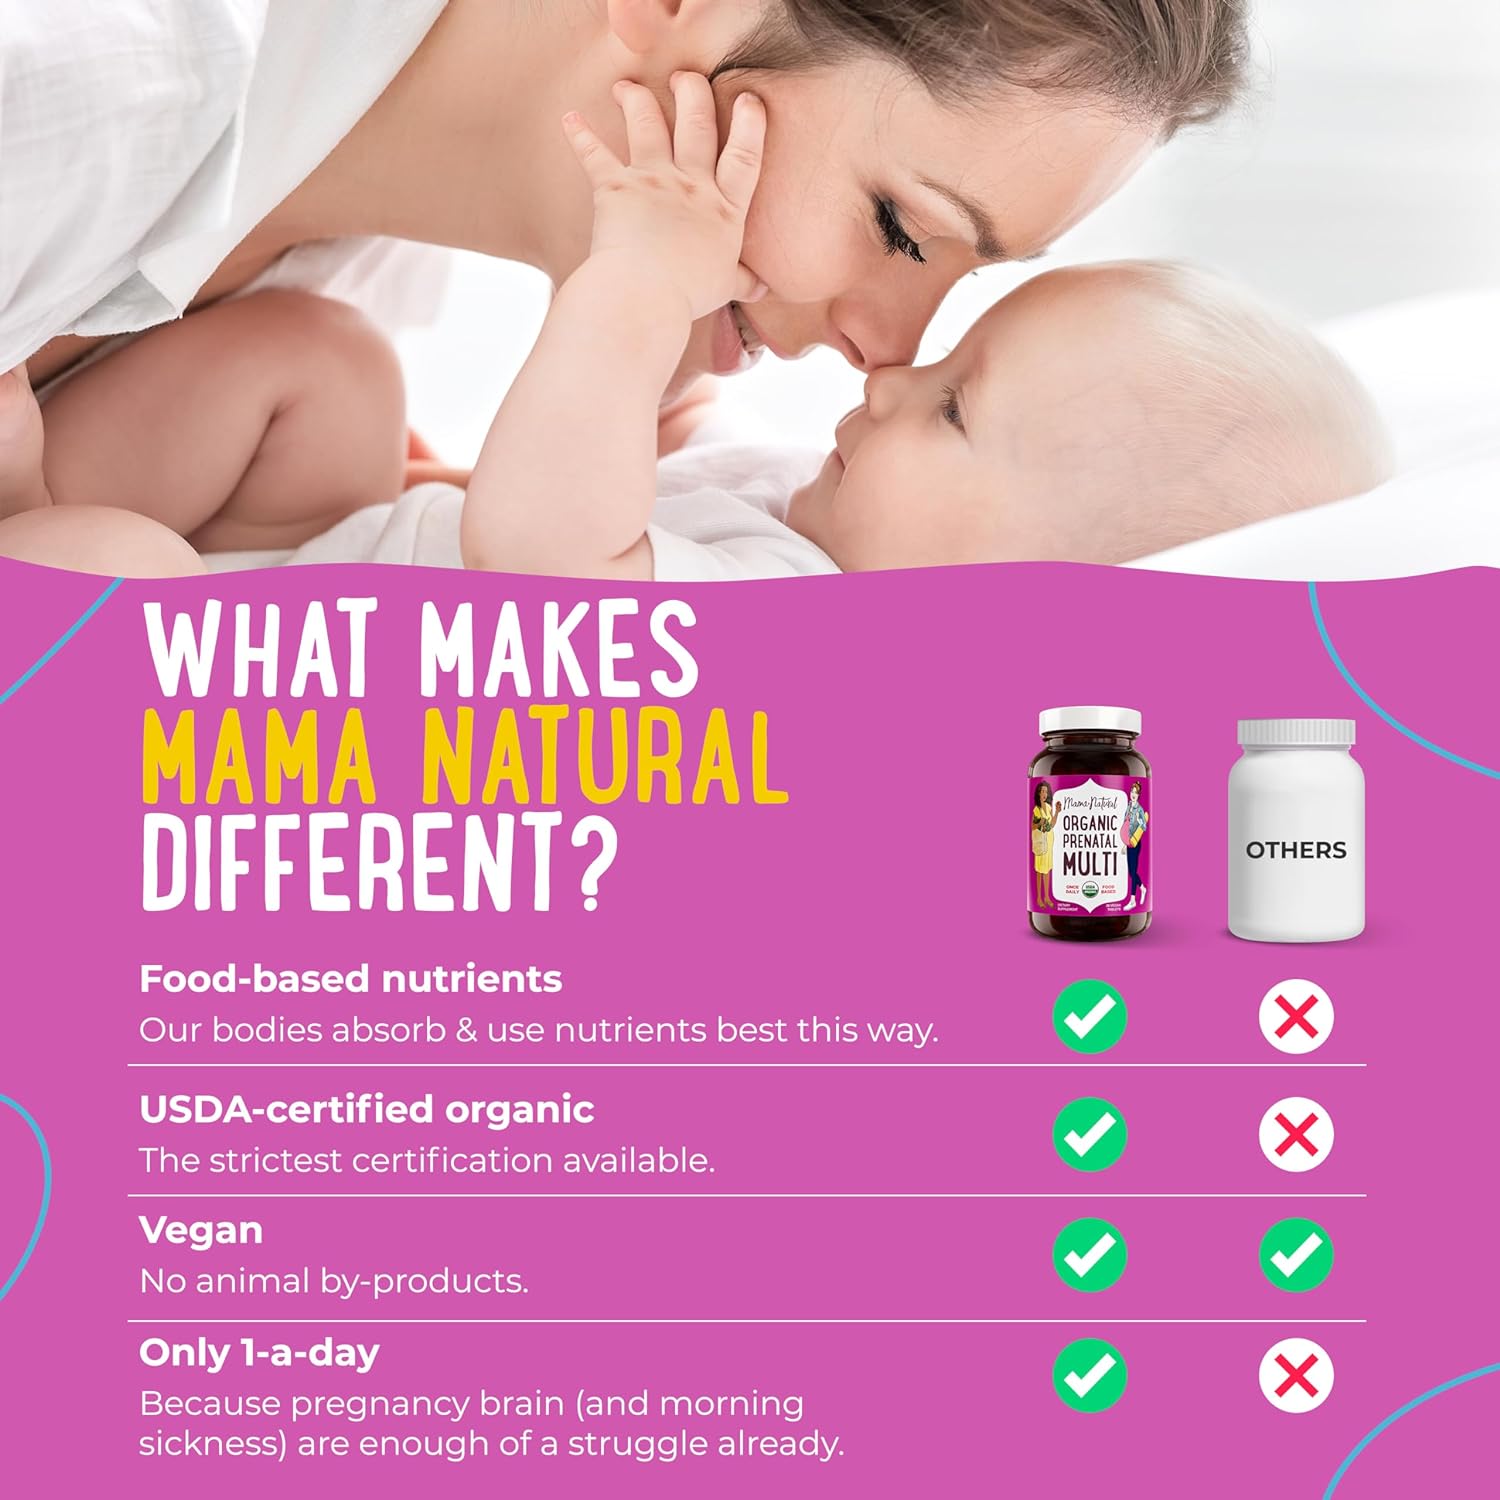 What makes Mama Natural different?